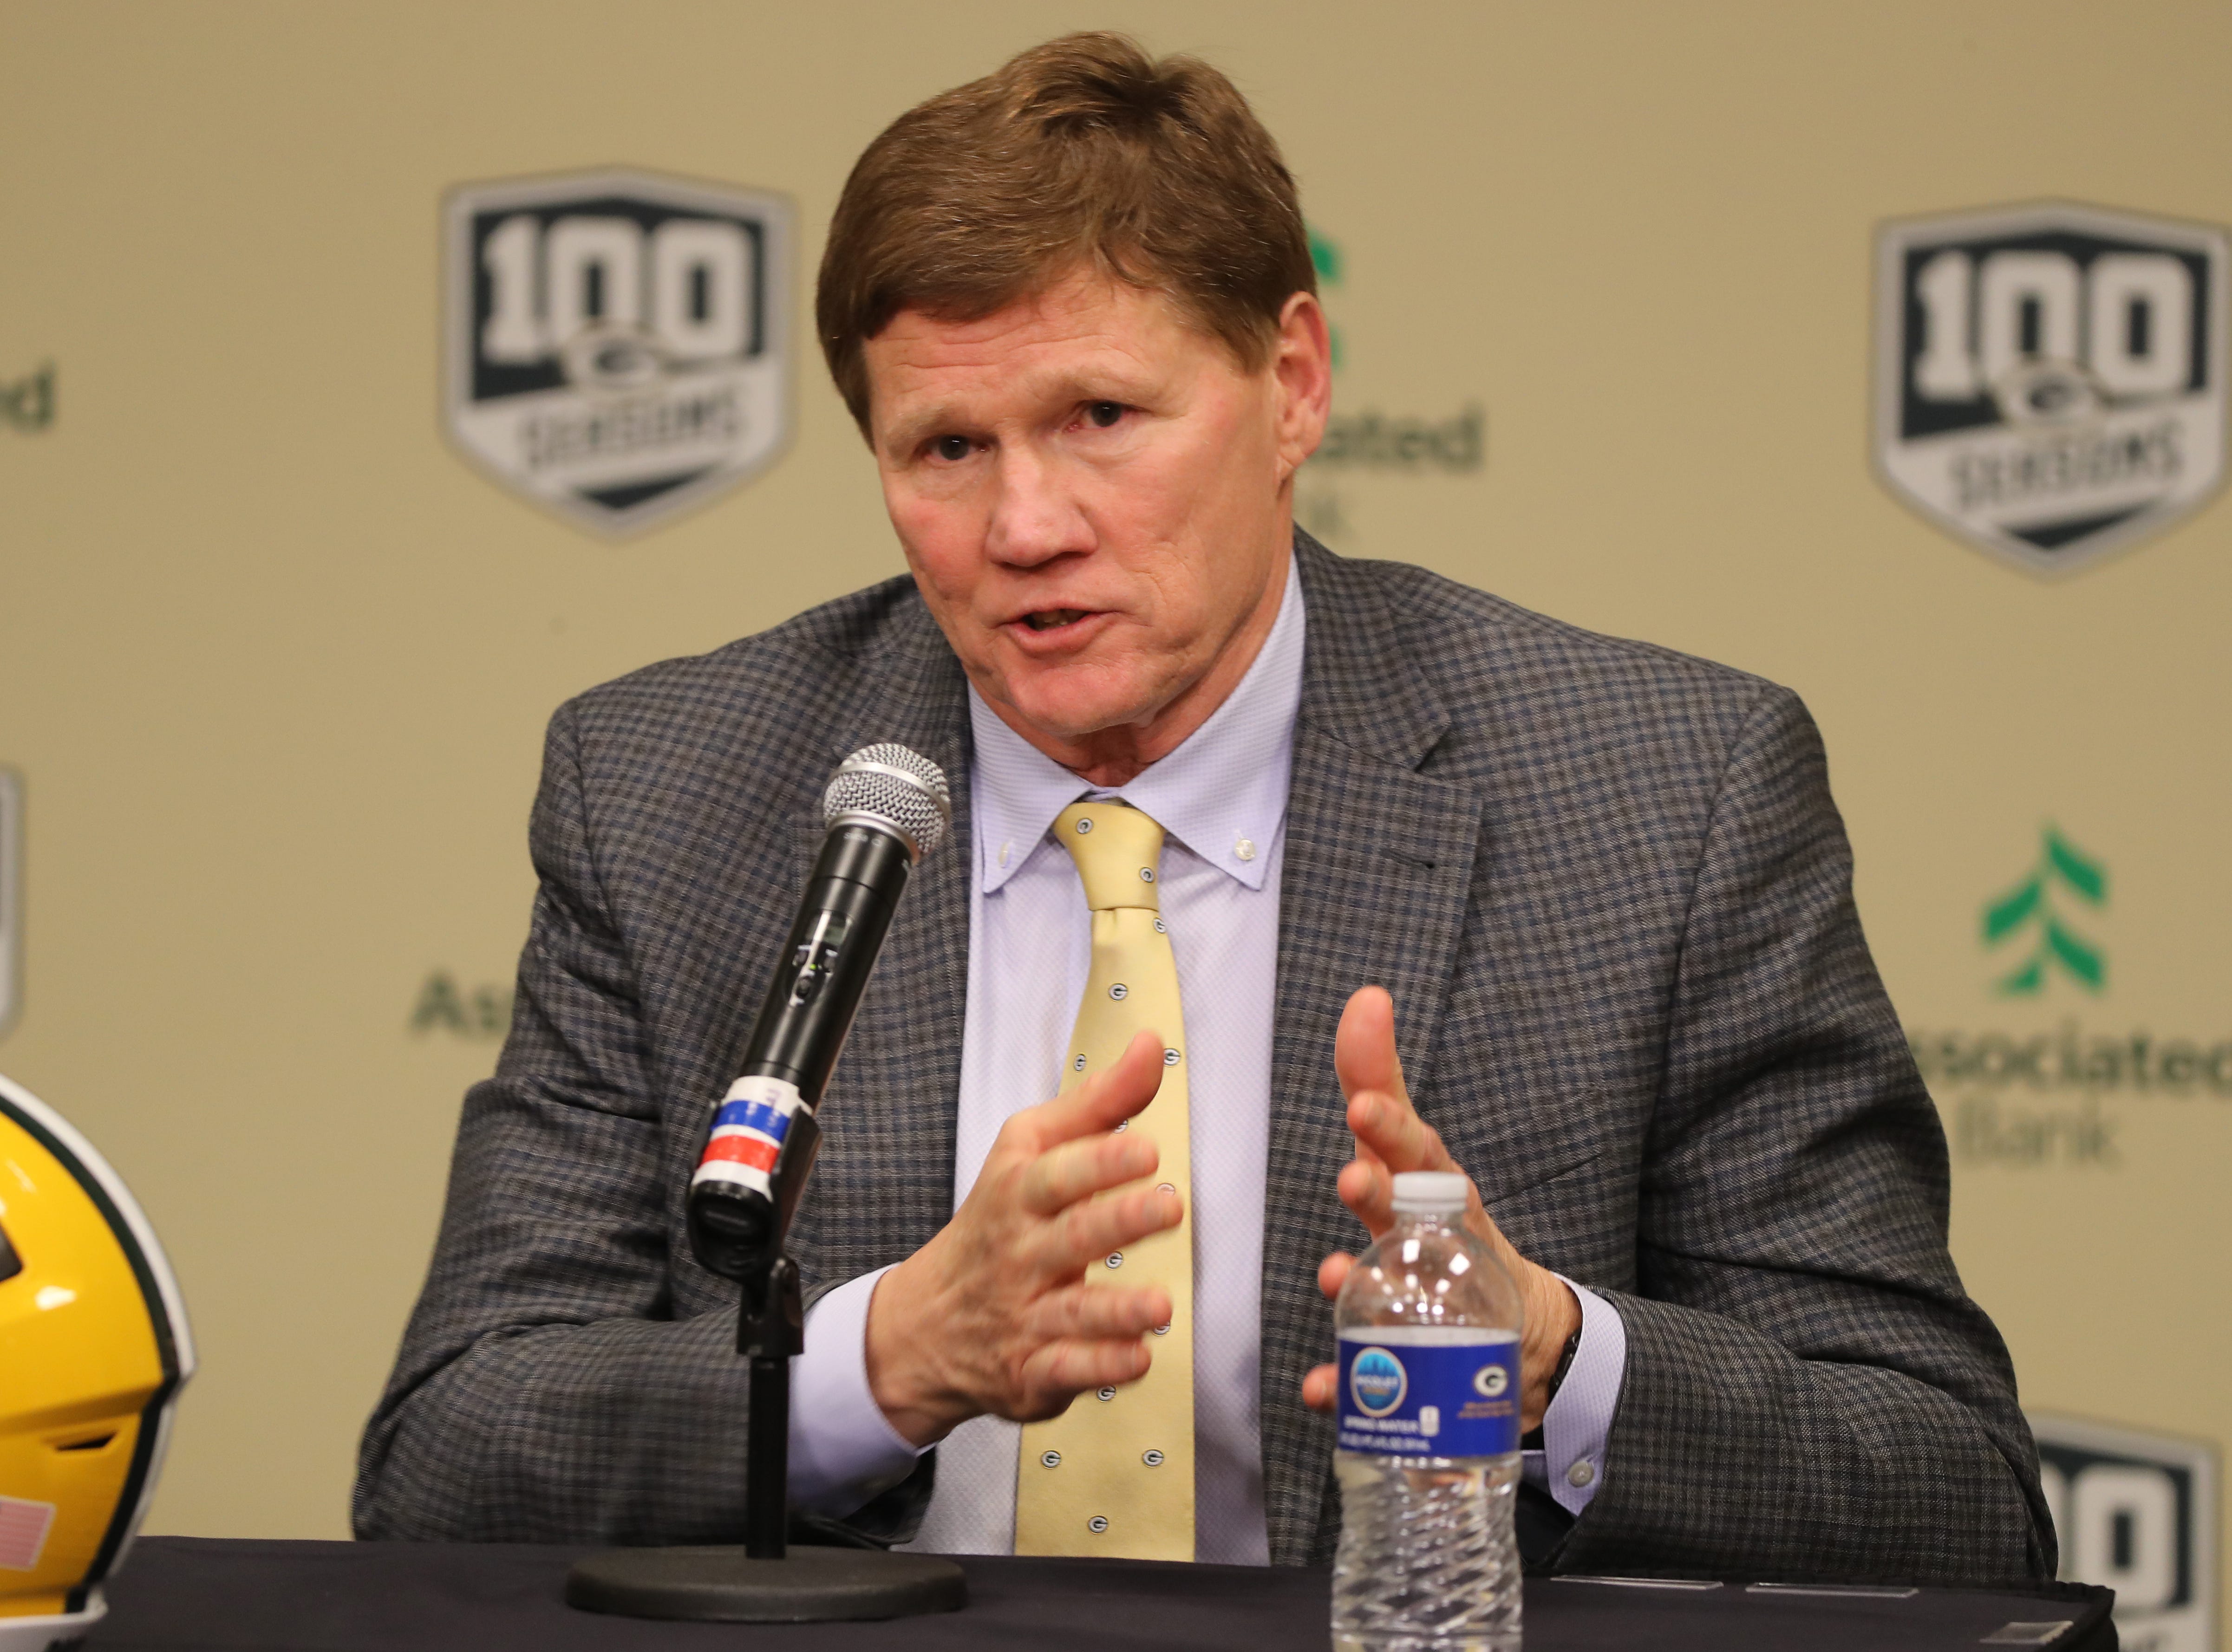 Green Bay Packers president Mark Murphy talks about the head coach interview experience as new head coach Matt LaFleur is introduced during a press conference in the Lambeau Field media auditorium Wednesday, January 9, 2019 in Green Bay, Wis.